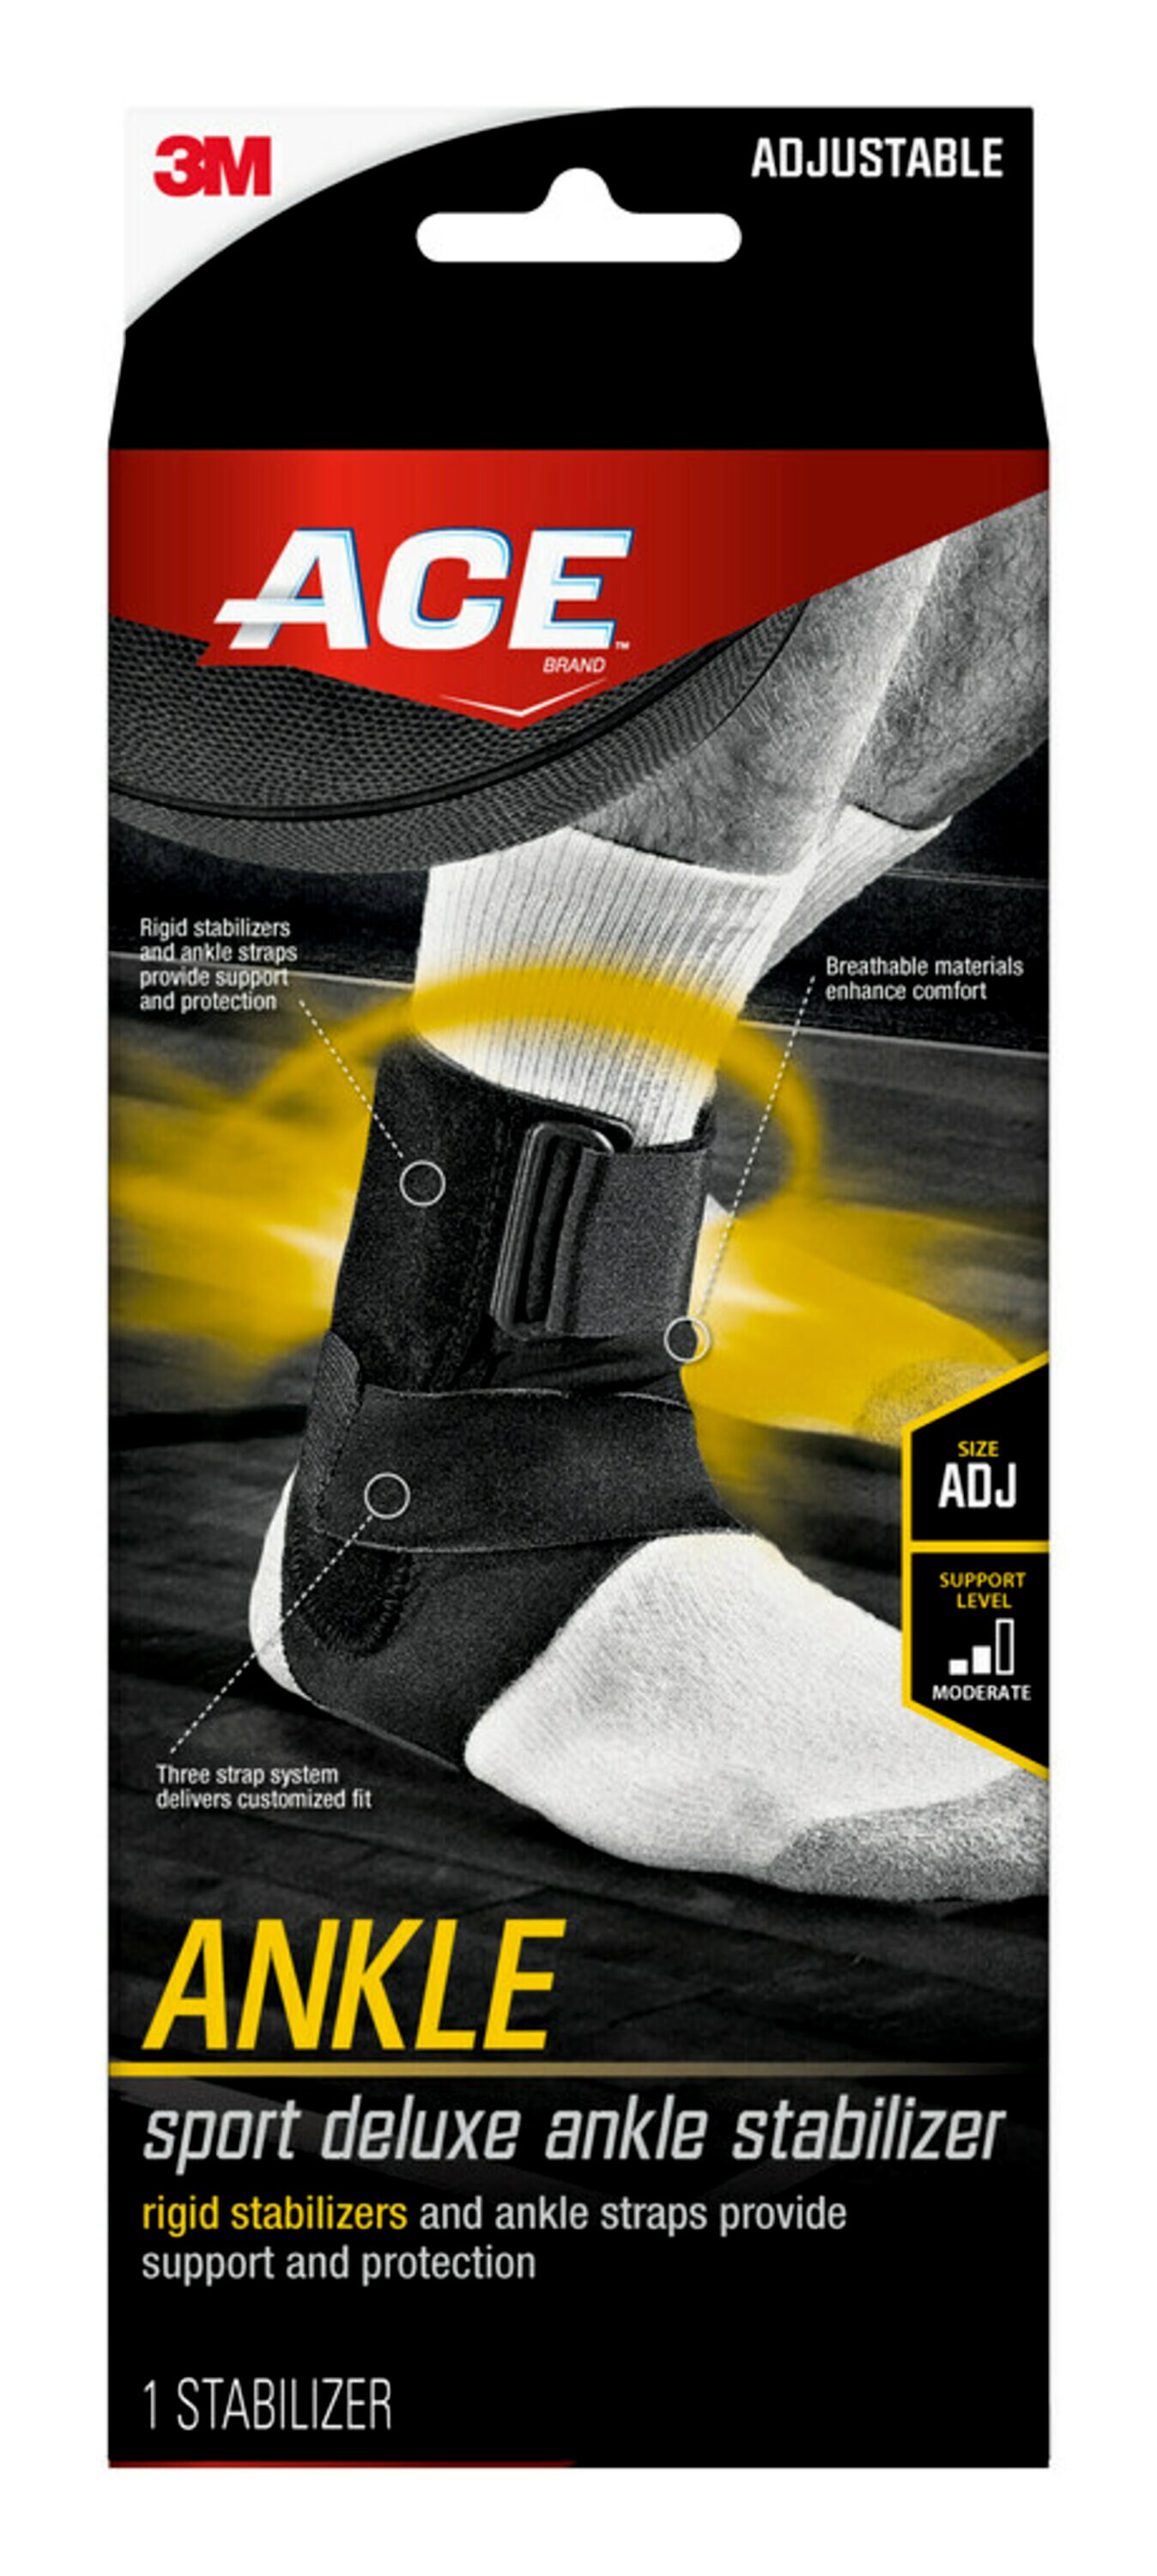 ACE Brand Deluxe Ankle Stabilizer, Adjustable Compression, Black - image 1 of 8